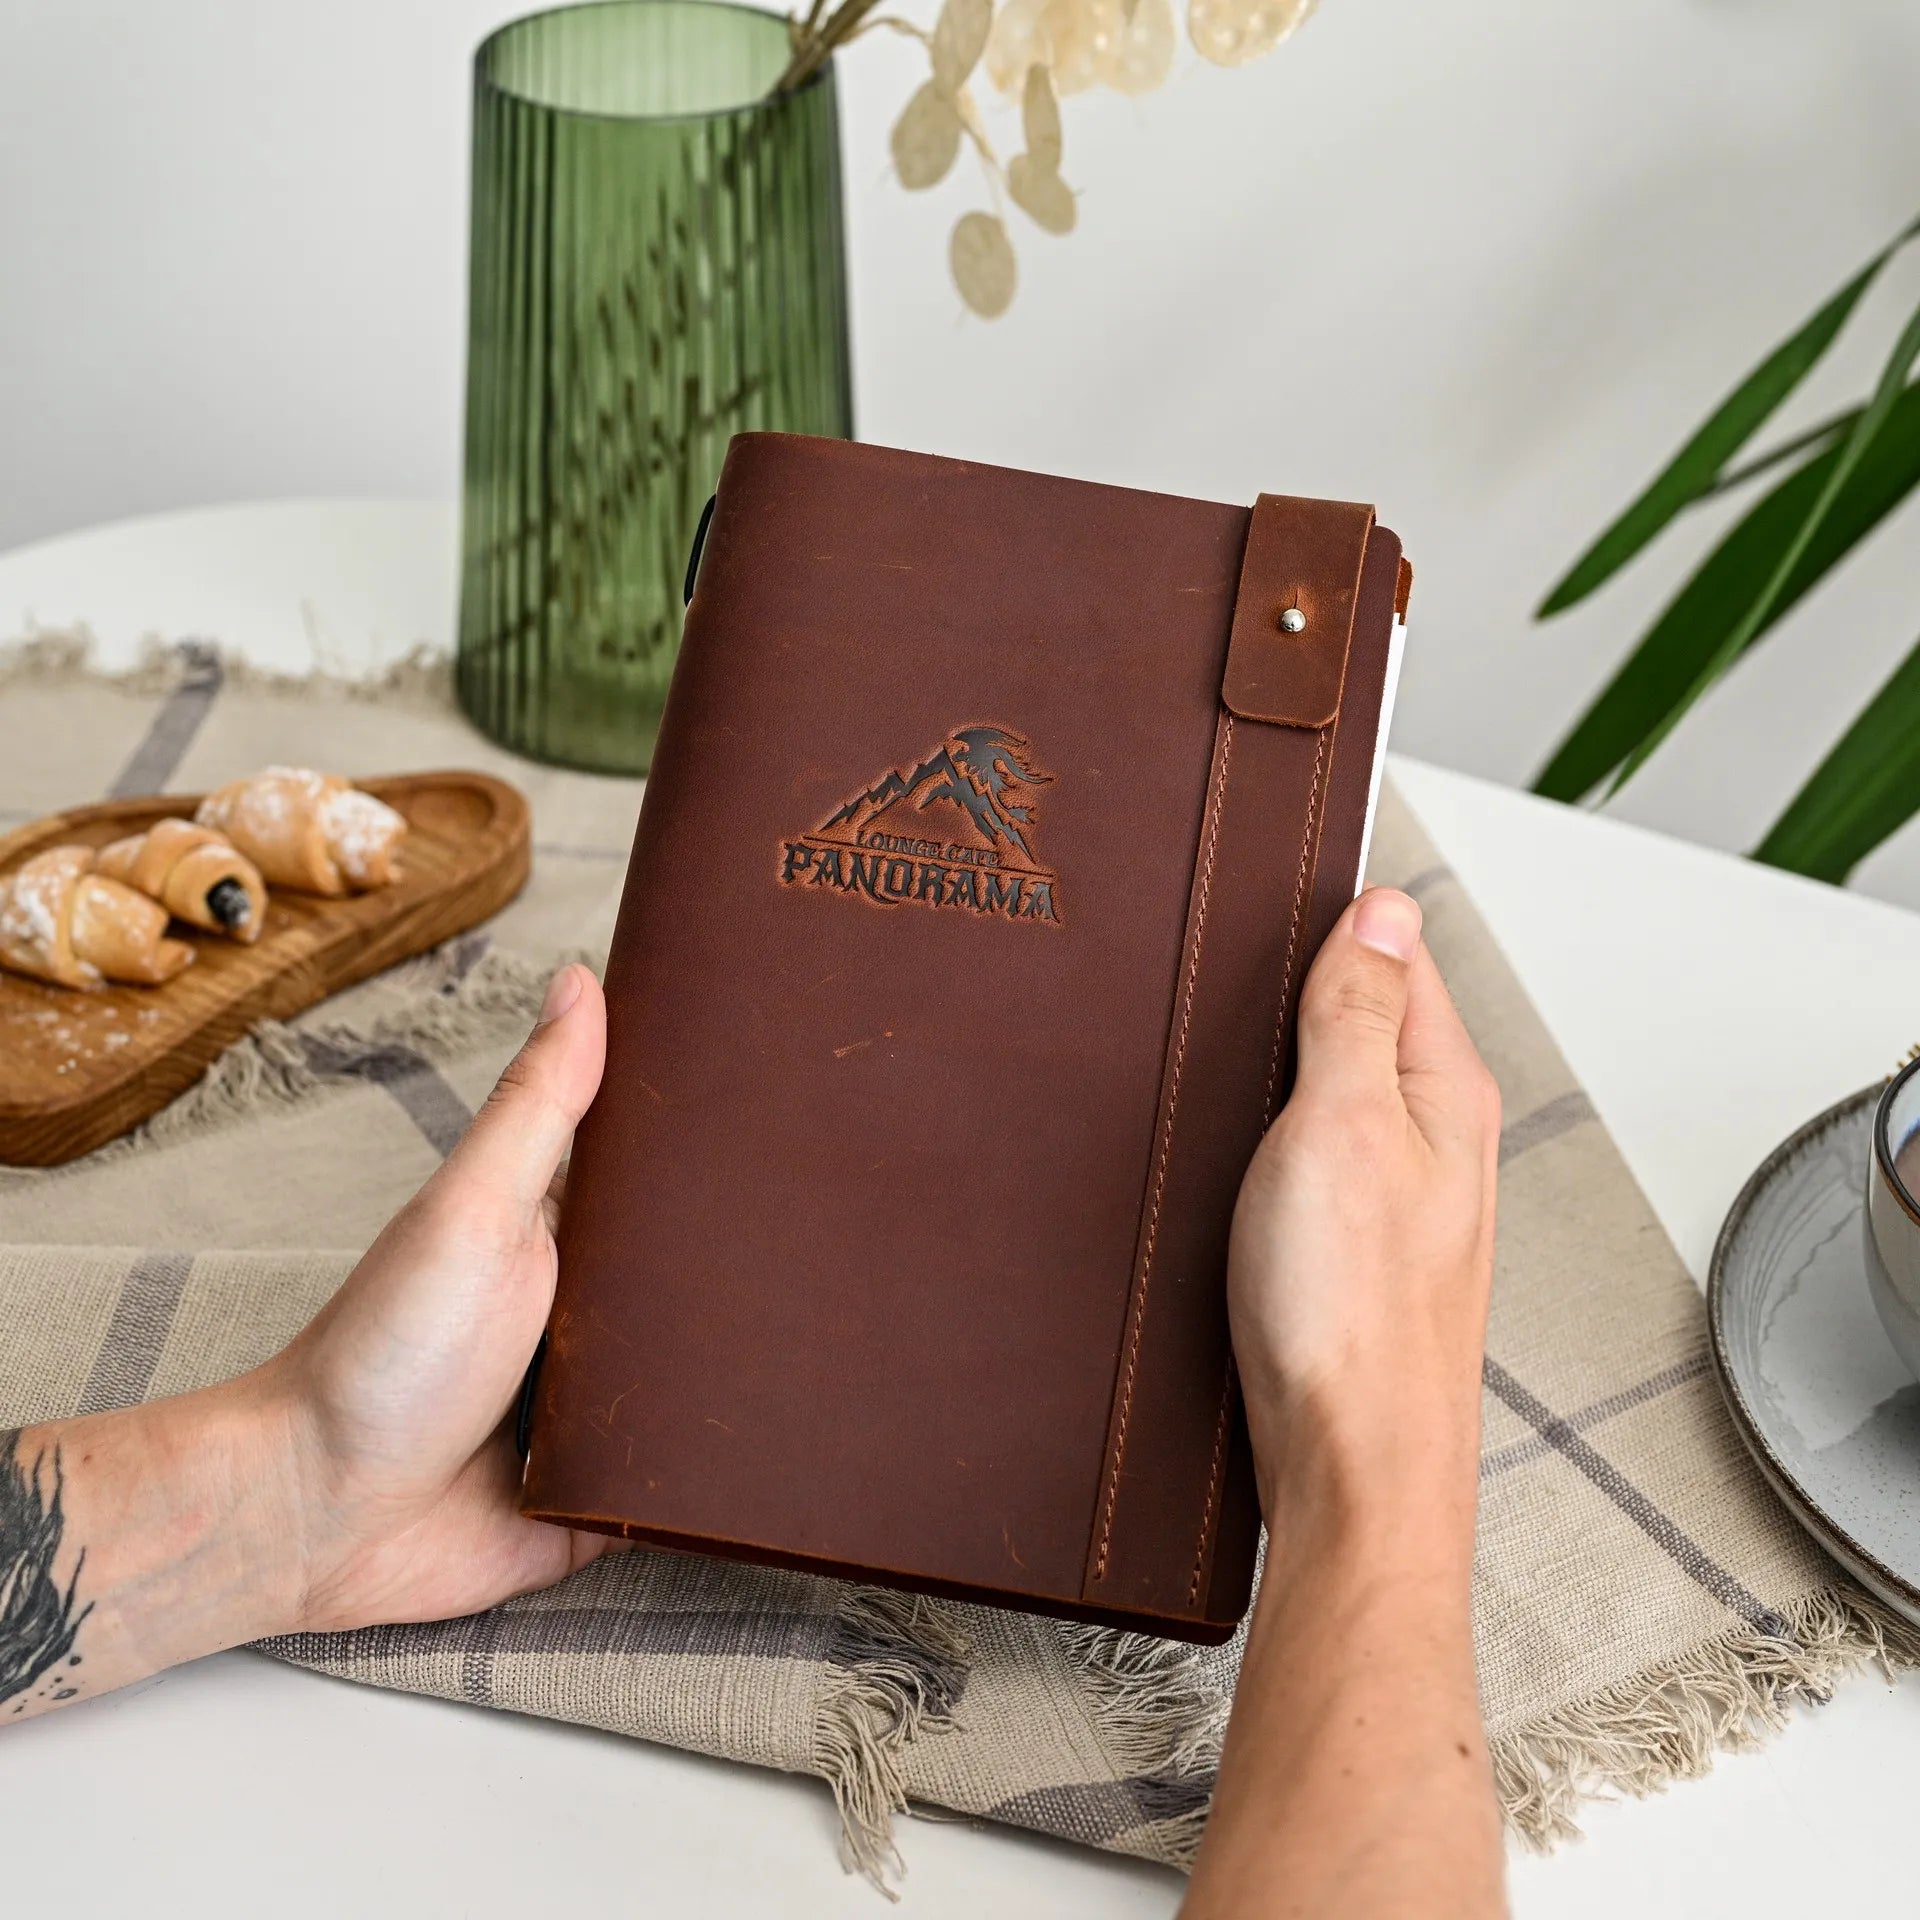 Showcase your brand with custom embossing on our leather menu holder, perfect for a unique dining experience.